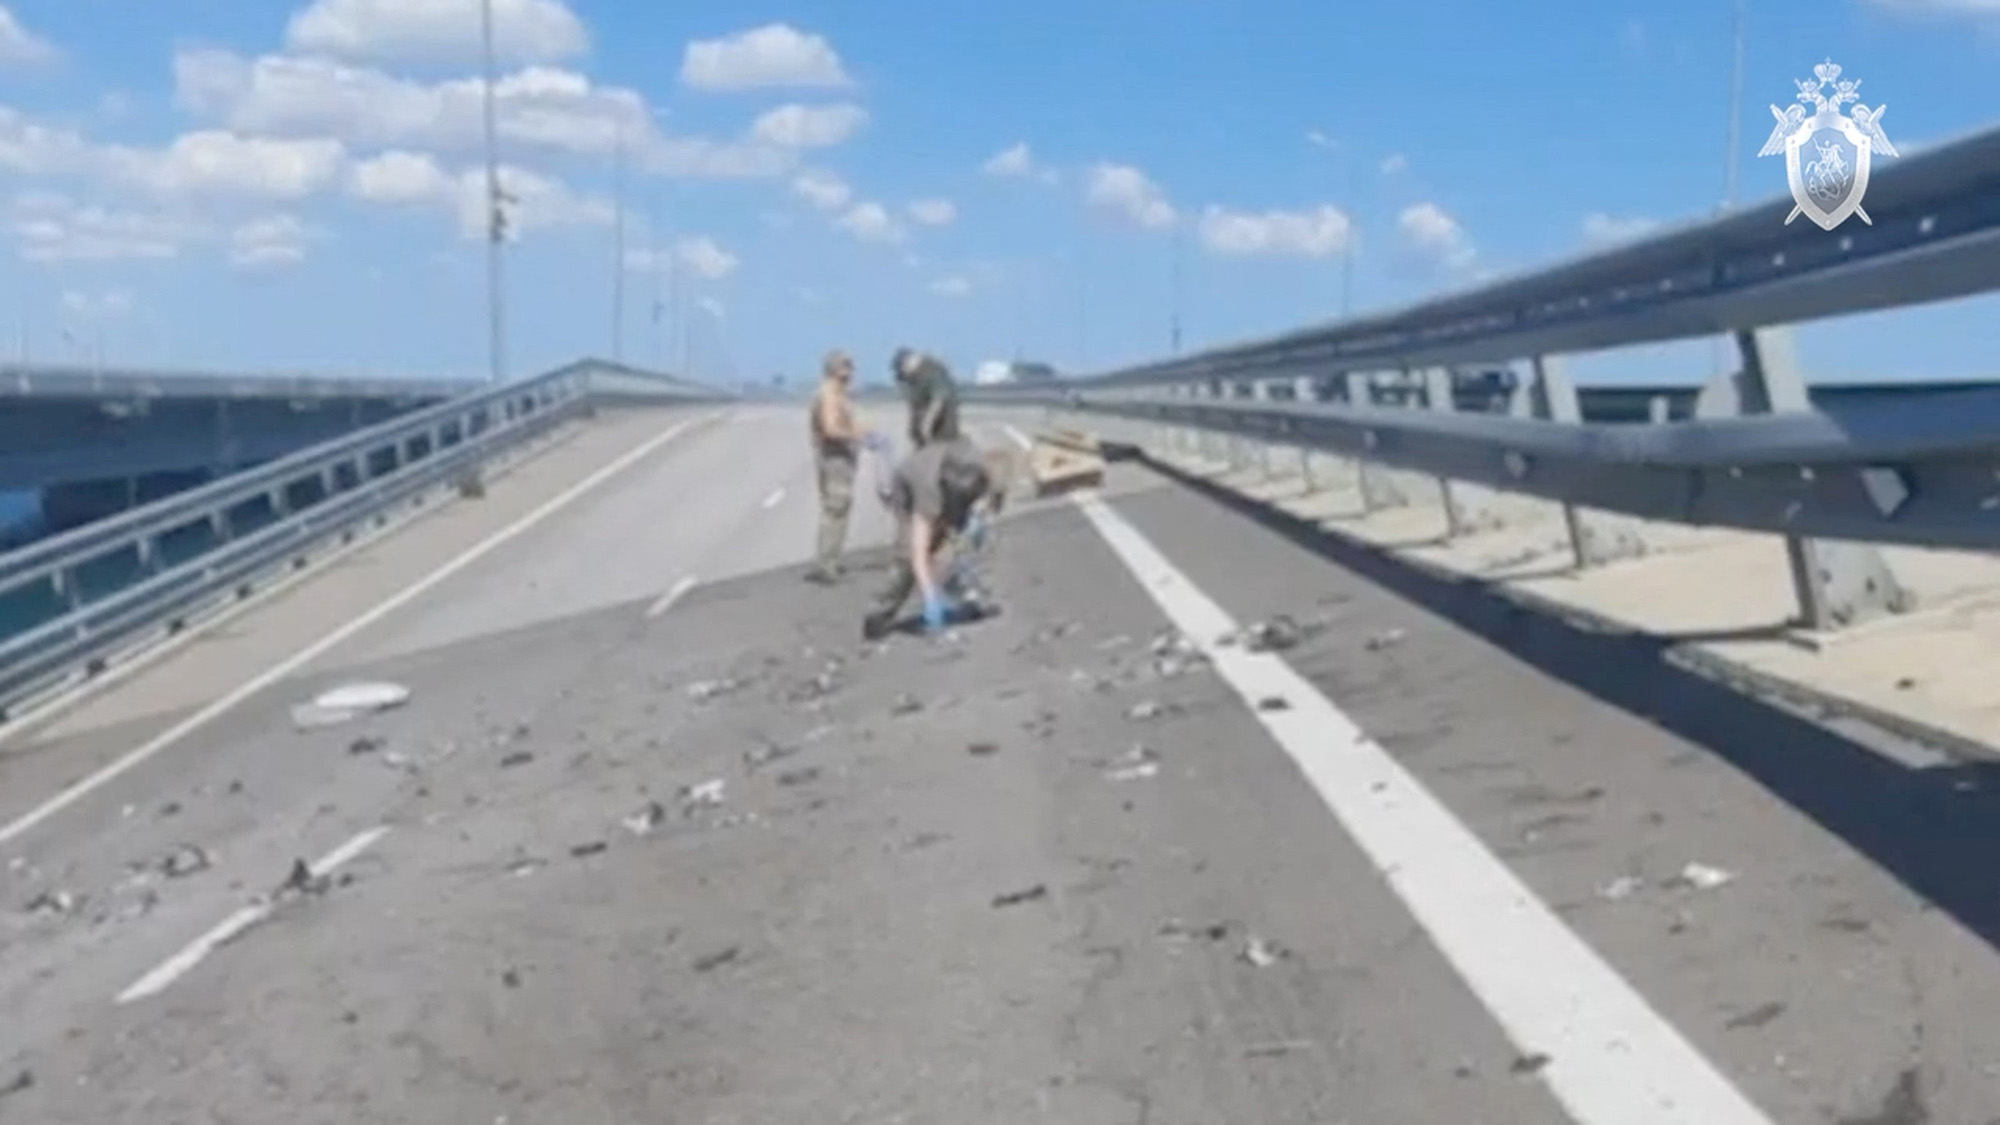 Russian investigators work at the scene on the section of a road sloping to one side following an alleged attack on the Crimea Bridge across the Kerch Strait, in this still image taken from video released on July 17.